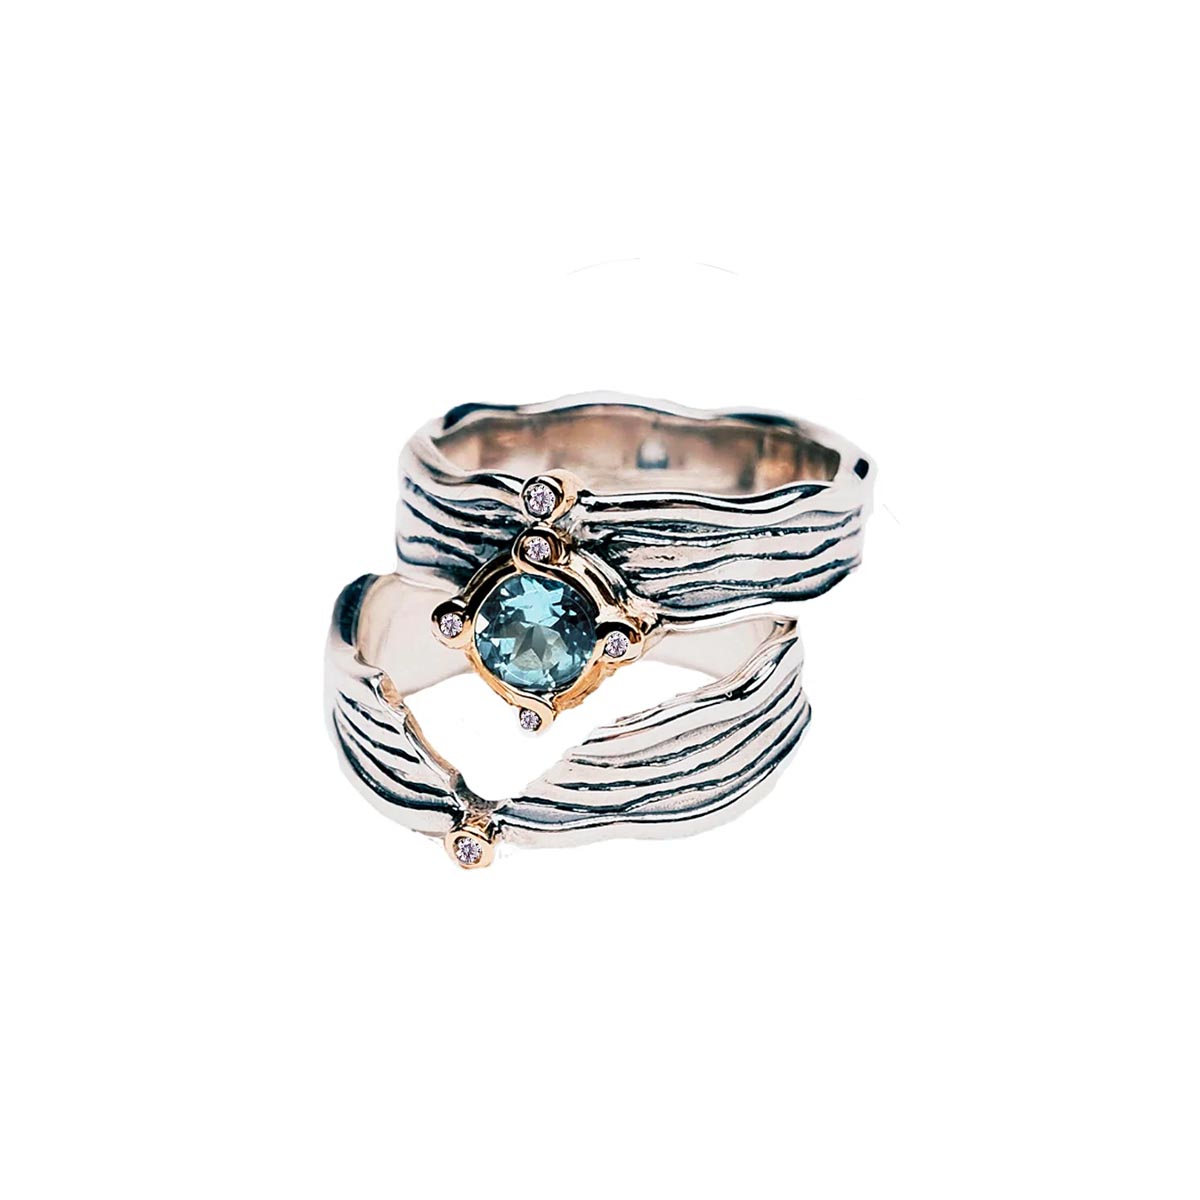 Keith Jack Rocks n Rivers Sky Blue Topaz Two Piece Ring Set in Sterling Silver and 10kt Yellow Gold with Cubic Zirconia (size 8)